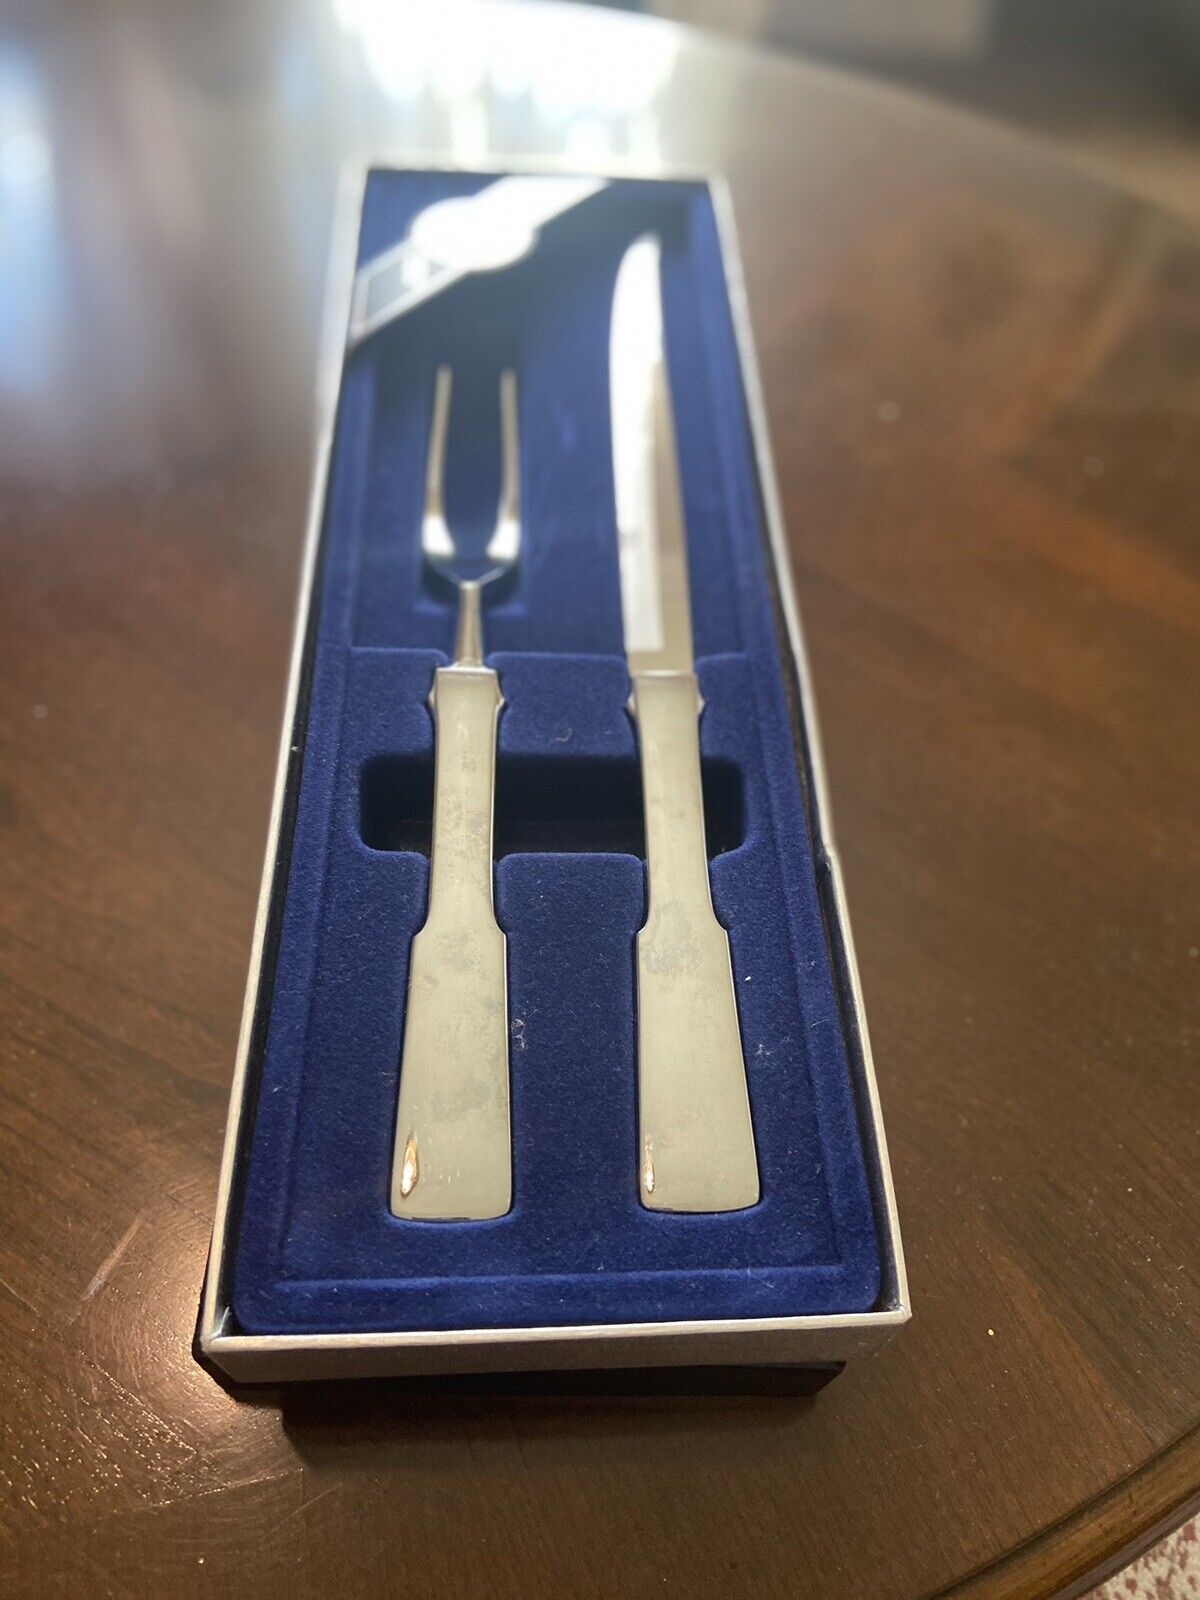 TOWLE BYFIELD CARVING KNIFE & FORK SET w/ Box Stainless Steel Vintage $0 S/H